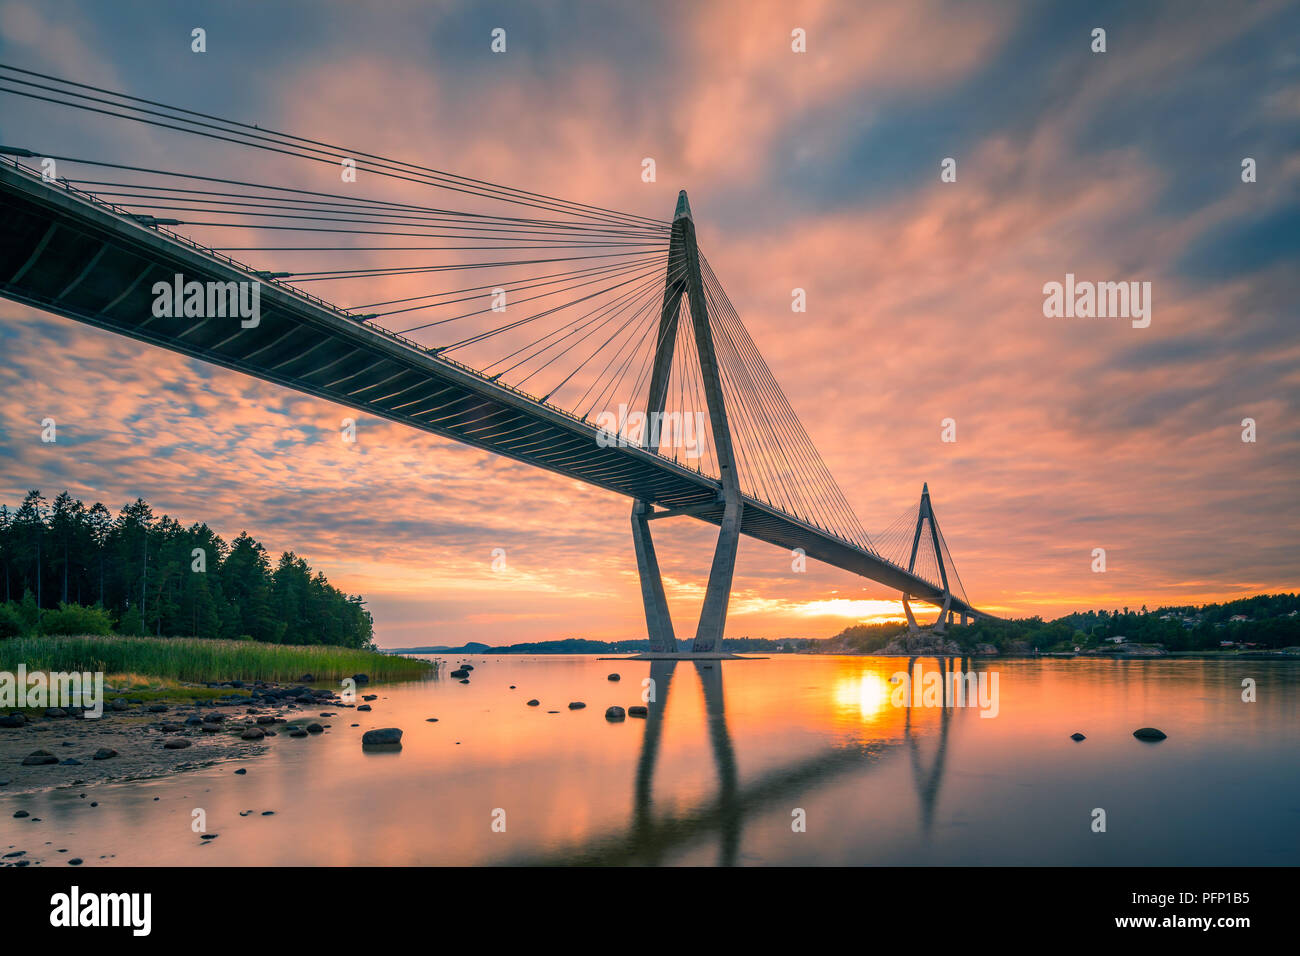 The Uddevalla Bridge is a cable-stayed bridge crossing Sunninge sound near Uddevalla in the province of Bohuslan on the west coast of Sweden Stock Photo